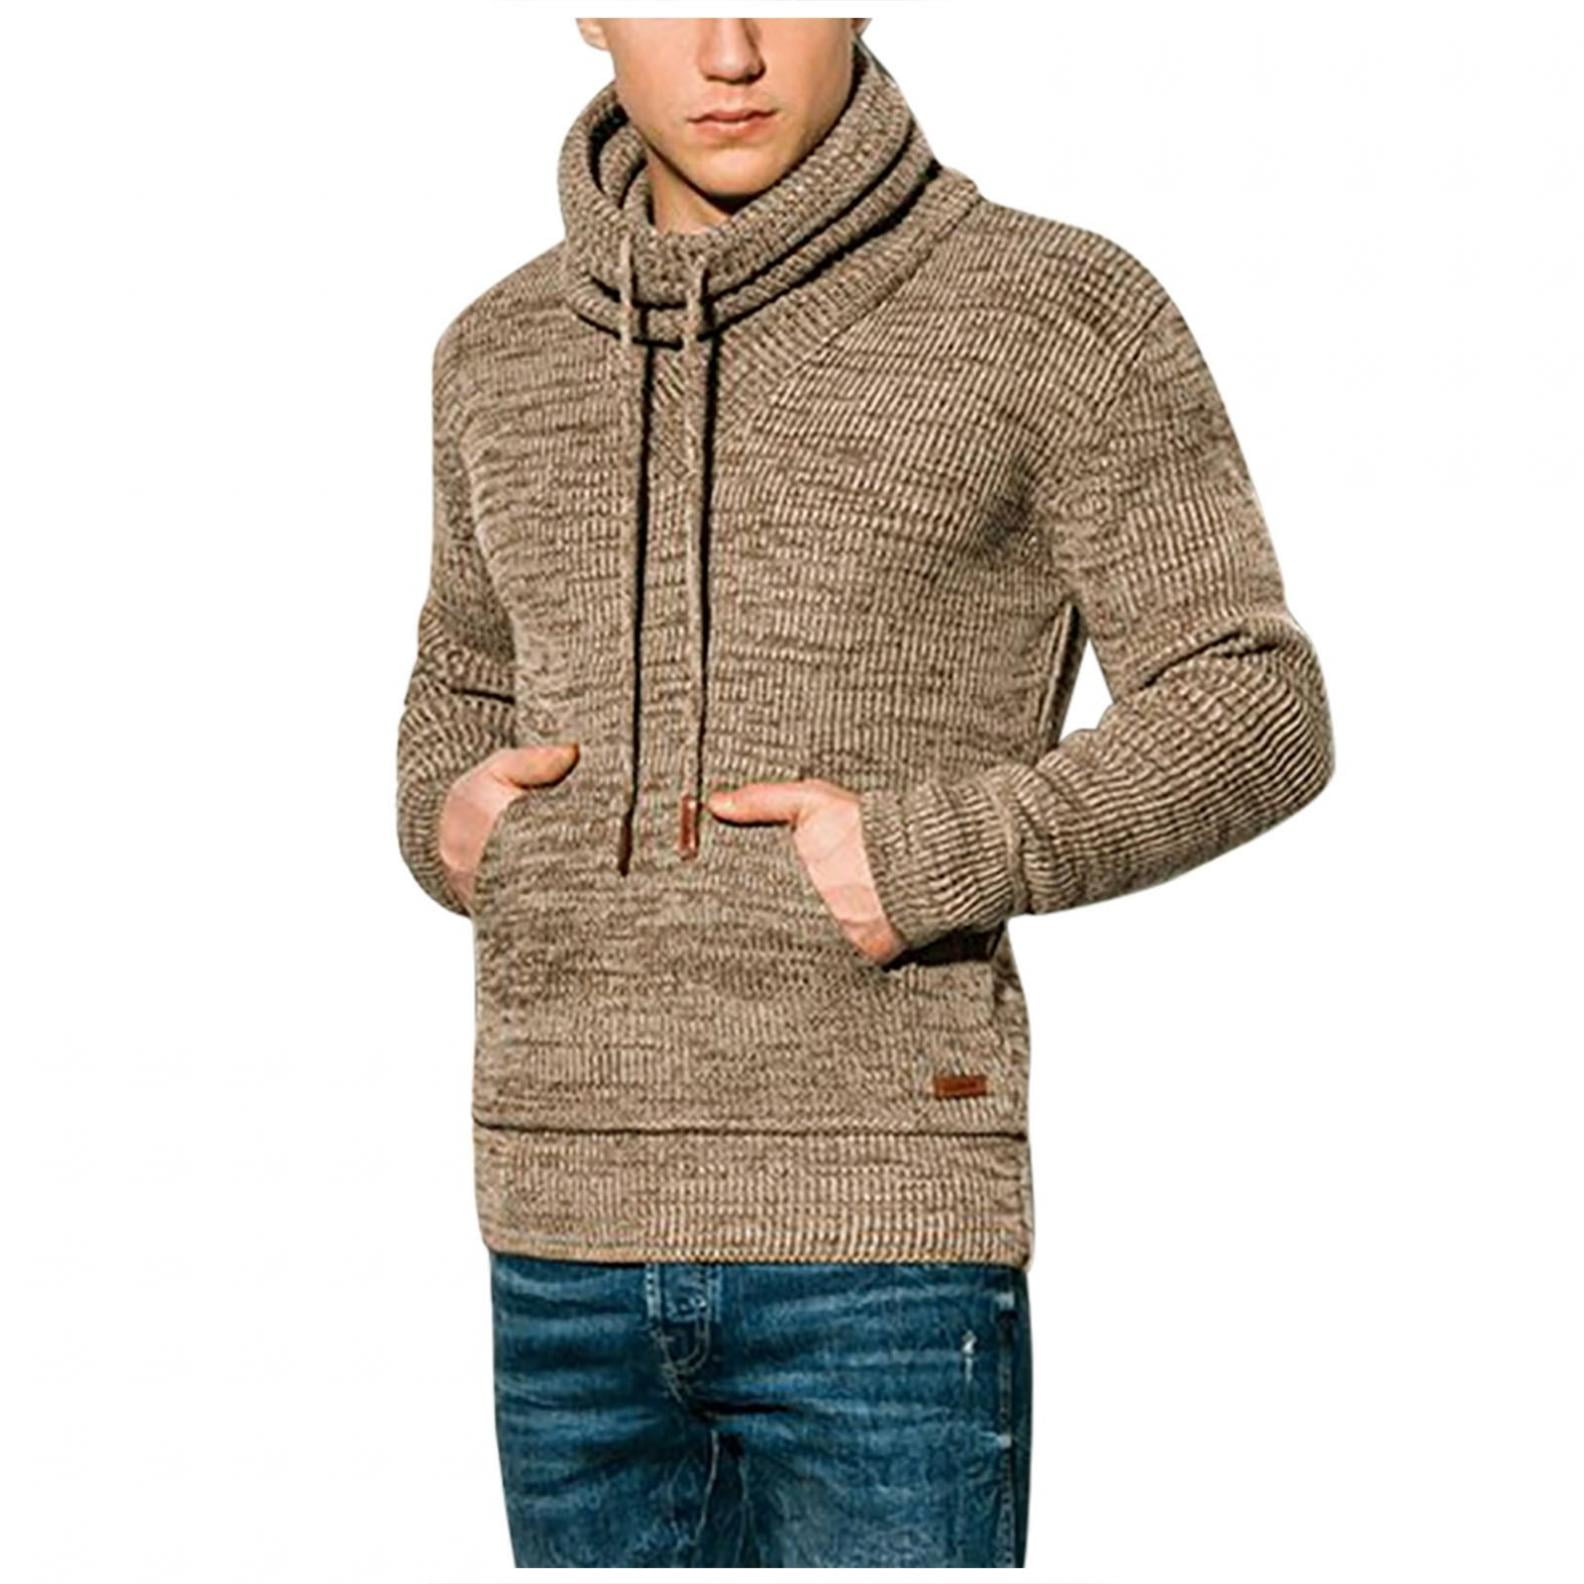 Men's Winter Turtleneck Cardigan Pullover Hoodies Knitted Casual Sweaters Coat 